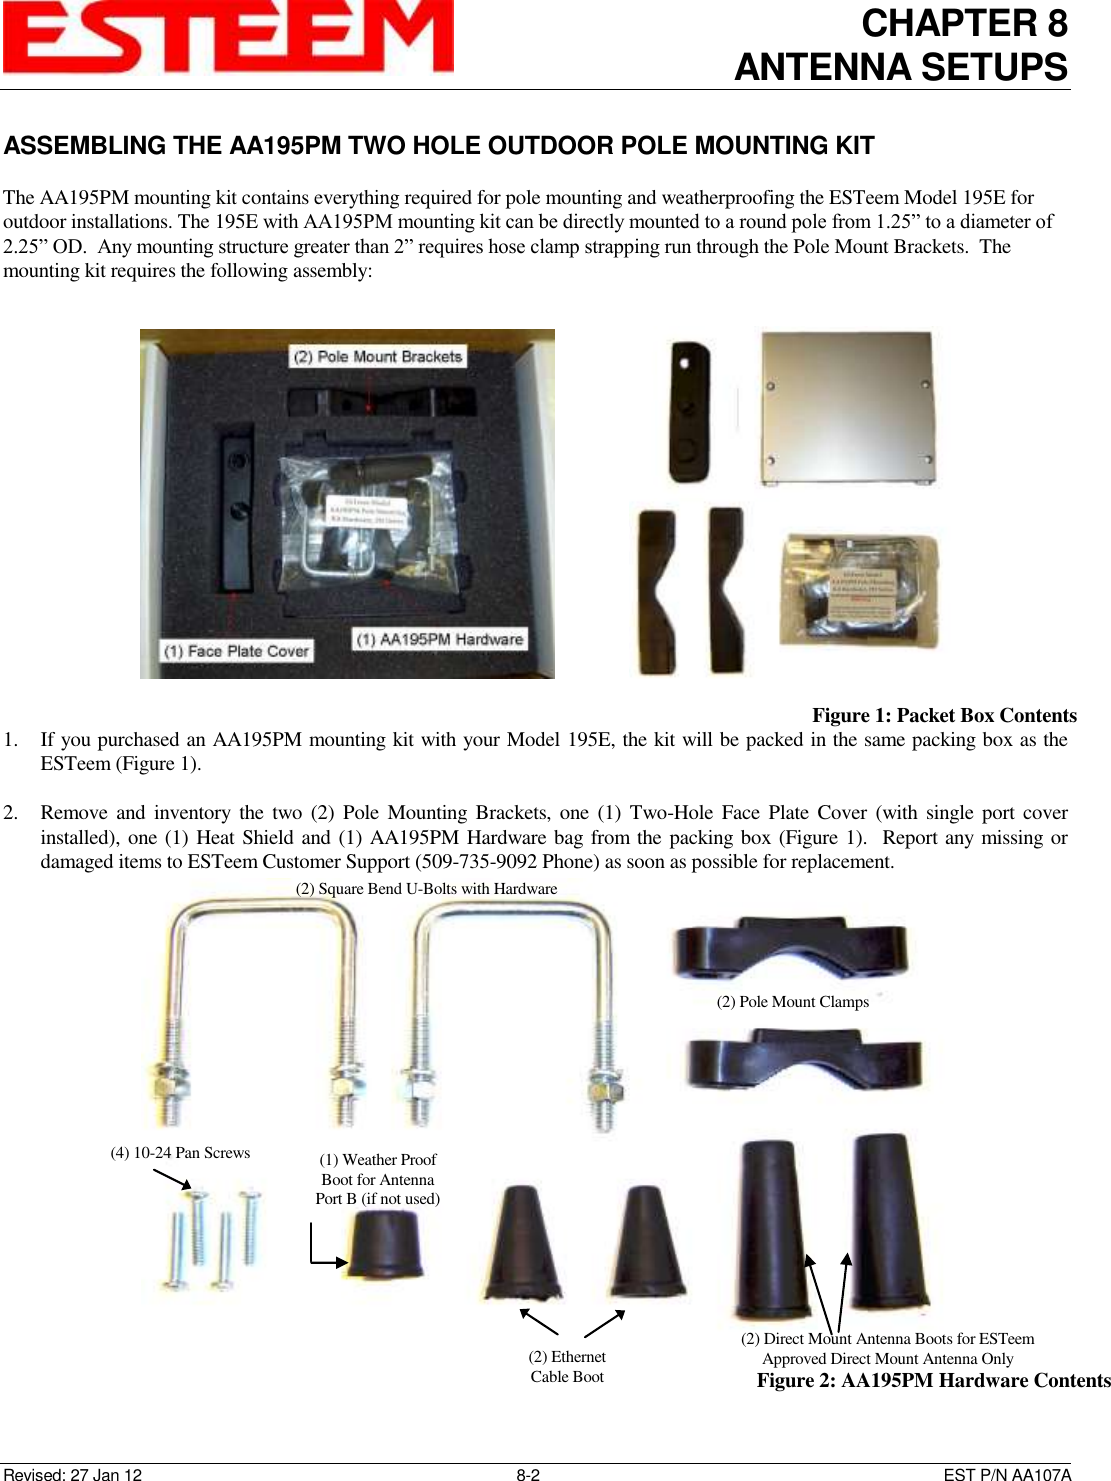 CHAPTER 8 ANTENNA SETUPS    Revised: 27 Jan 12  8-2   EST P/N AA107A ASSEMBLING THE AA195PM TWO HOLE OUTDOOR POLE MOUNTING KIT  The AA195PM mounting kit contains everything required for pole mounting and weatherproofing the ESTeem Model 195E for outdoor installations. The 195E with AA195PM mounting kit can be directly mounted to a round pole from 1.25” to a diameter of 2.25” OD.  Any mounting structure greater than 2” requires hose clamp strapping run through the Pole Mount Brackets.  The mounting kit requires the following assembly:  1. If you purchased an AA195PM mounting kit with your Model 195E, the kit will be packed in the same packing box as the ESTeem (Figure 1).    2. Remove and inventory the  two  (2)  Pole Mounting Brackets, one (1) Two-Hole  Face Plate  Cover  (with single  port cover installed), one (1) Heat Shield and (1) AA195PM Hardware bag from the packing box (Figure 1).  Report any missing or damaged items to ESTeem Customer Support (509-735-9092 Phone) as soon as possible for replacement.                    Figure 1: Packet Box Contents   Figure 2: AA195PM Hardware Contents (2) Square Bend U-Bolts with Hardware (2) Pole Mount Clamps (4) 10-24 Pan Screws (2) Ethernet Cable Boot (1) Weather Proof Boot for Antenna Port B (if not used) (2) Direct Mount Antenna Boots for ESTeem Approved Direct Mount Antenna Only 